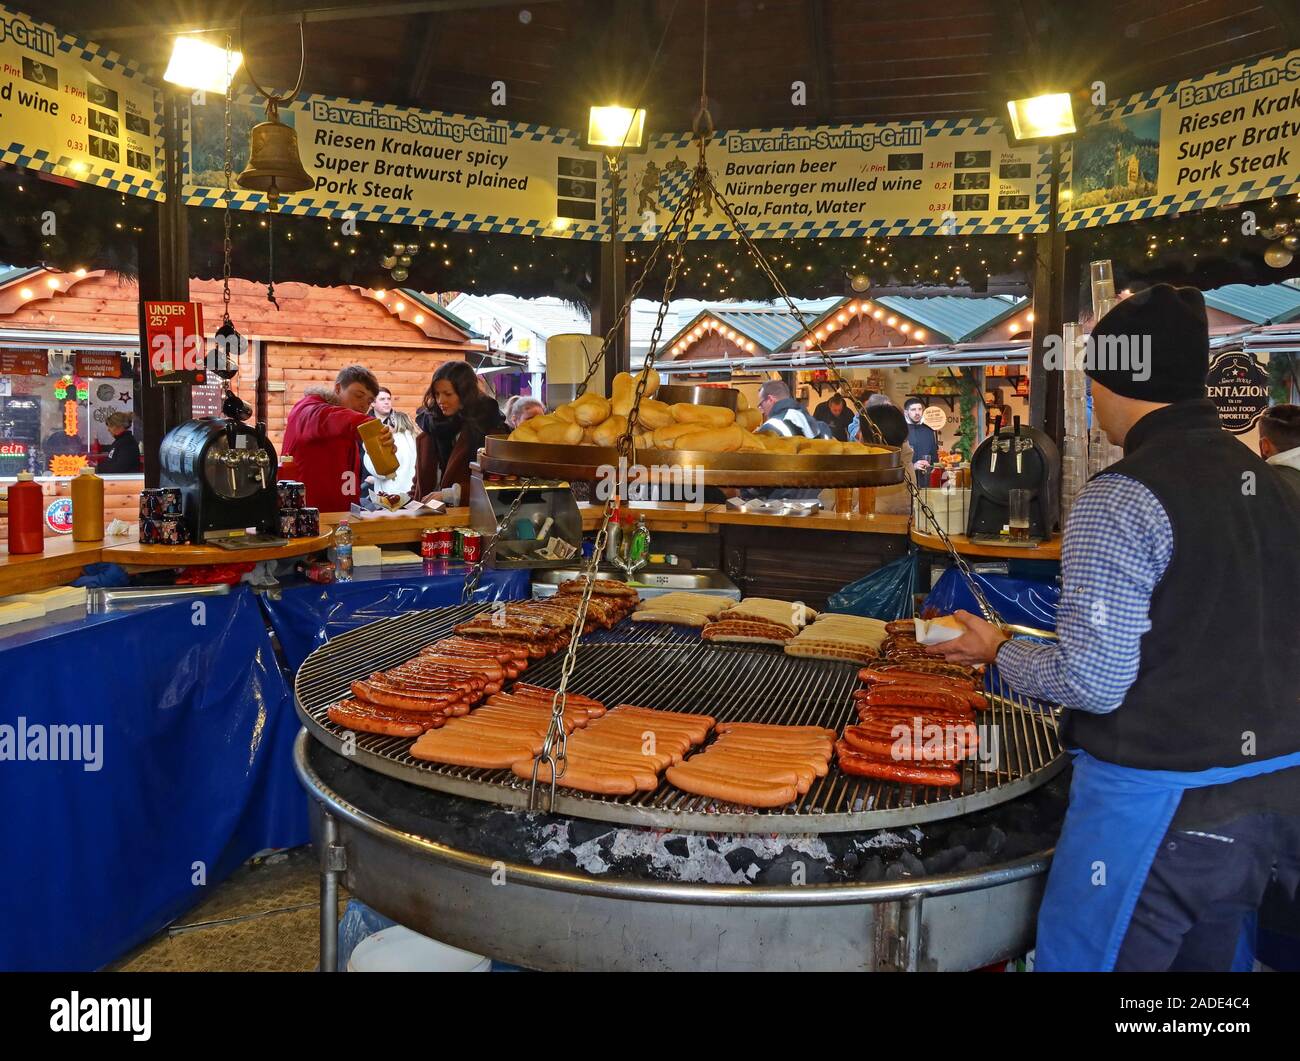 Bavarian Swing Grill,sausages,Wurst,bratwurst,currywurst,grilling over charcoals,German market,Christmas market, Albert Square,Manchester,England,UK, Stock Photo